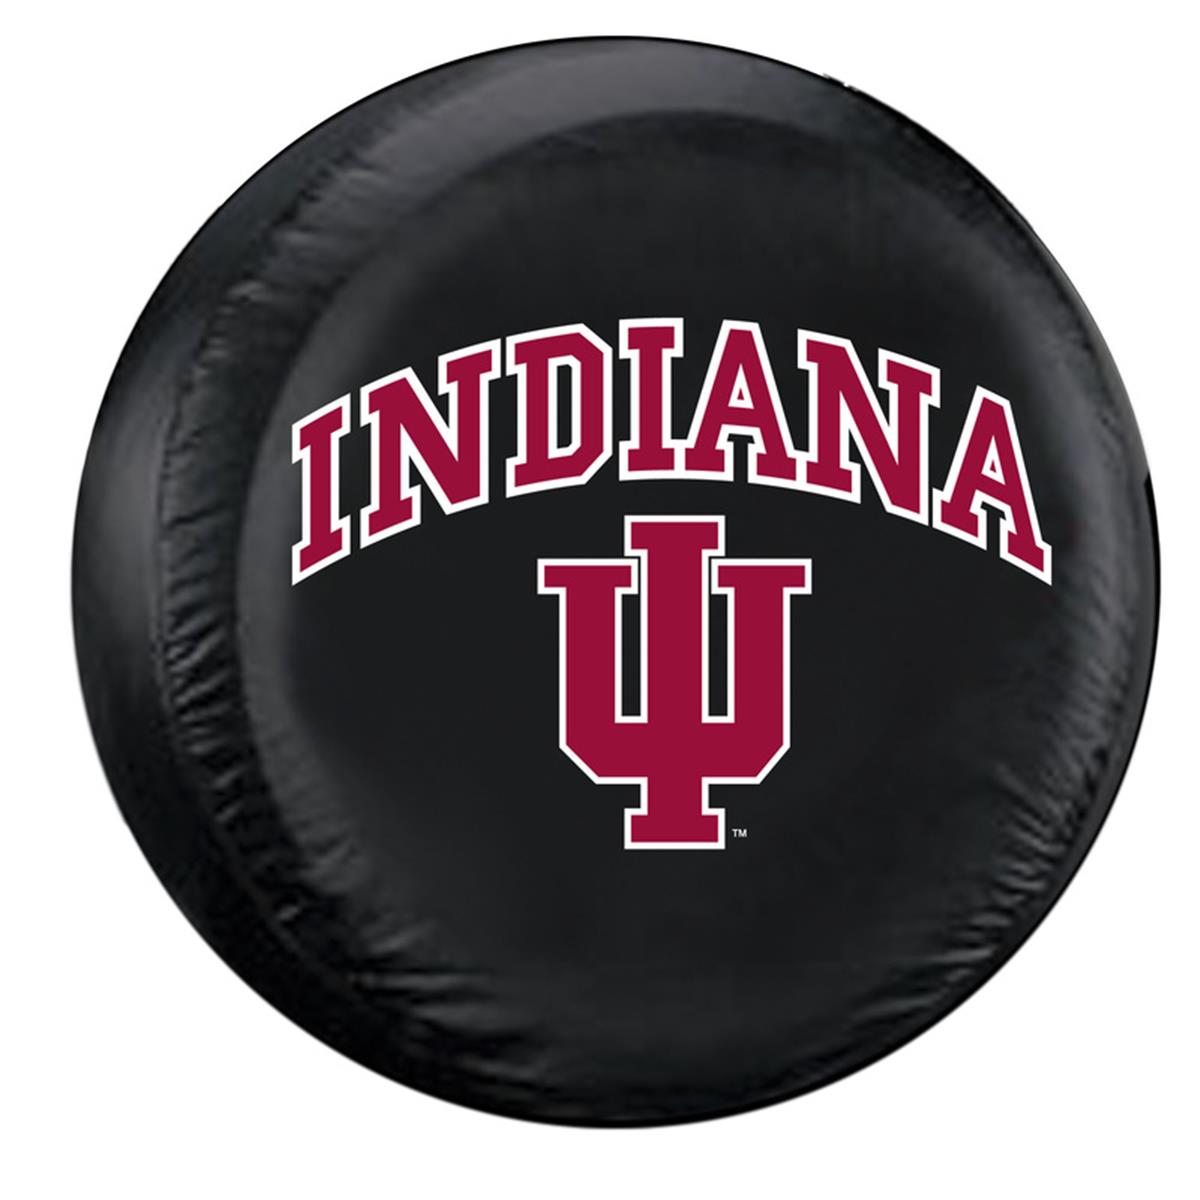 Picture of Fremont Die 2324558325 Indiana Hoosiers Tire Cover, Black - Large